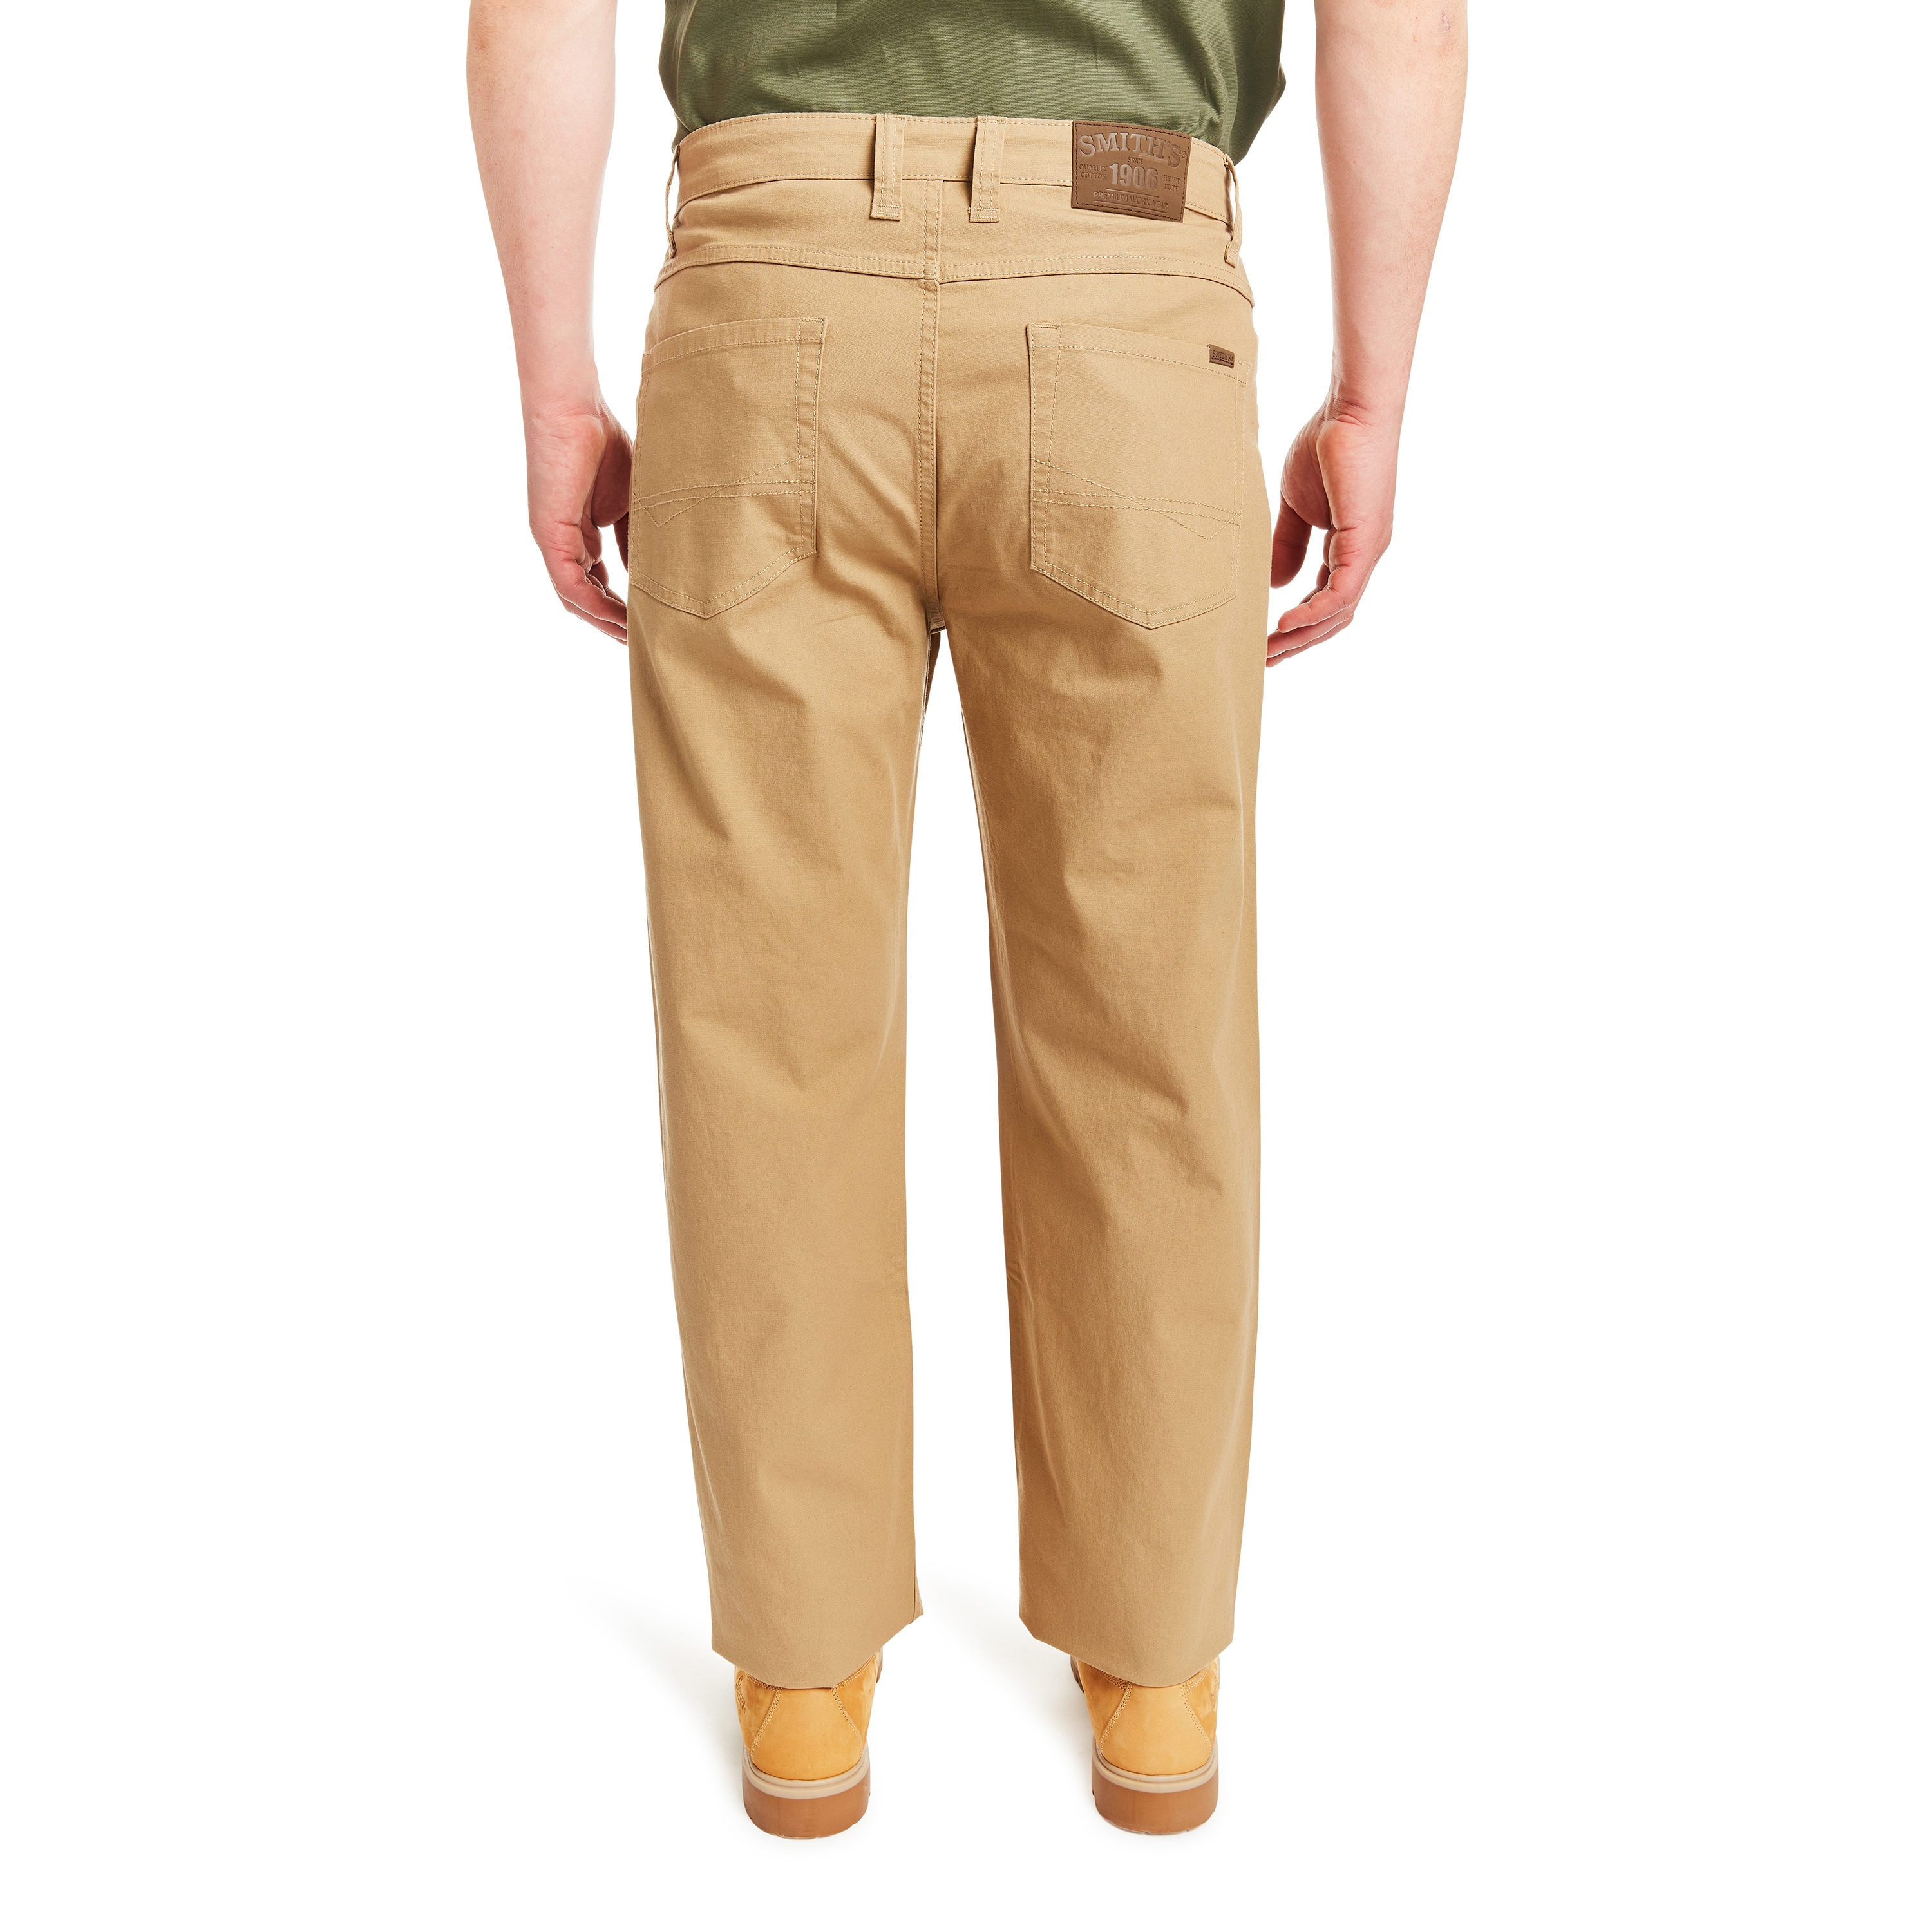 Smith's Workwear Men's Relaxed Fit Khaki Stretch Canvas Work Pants